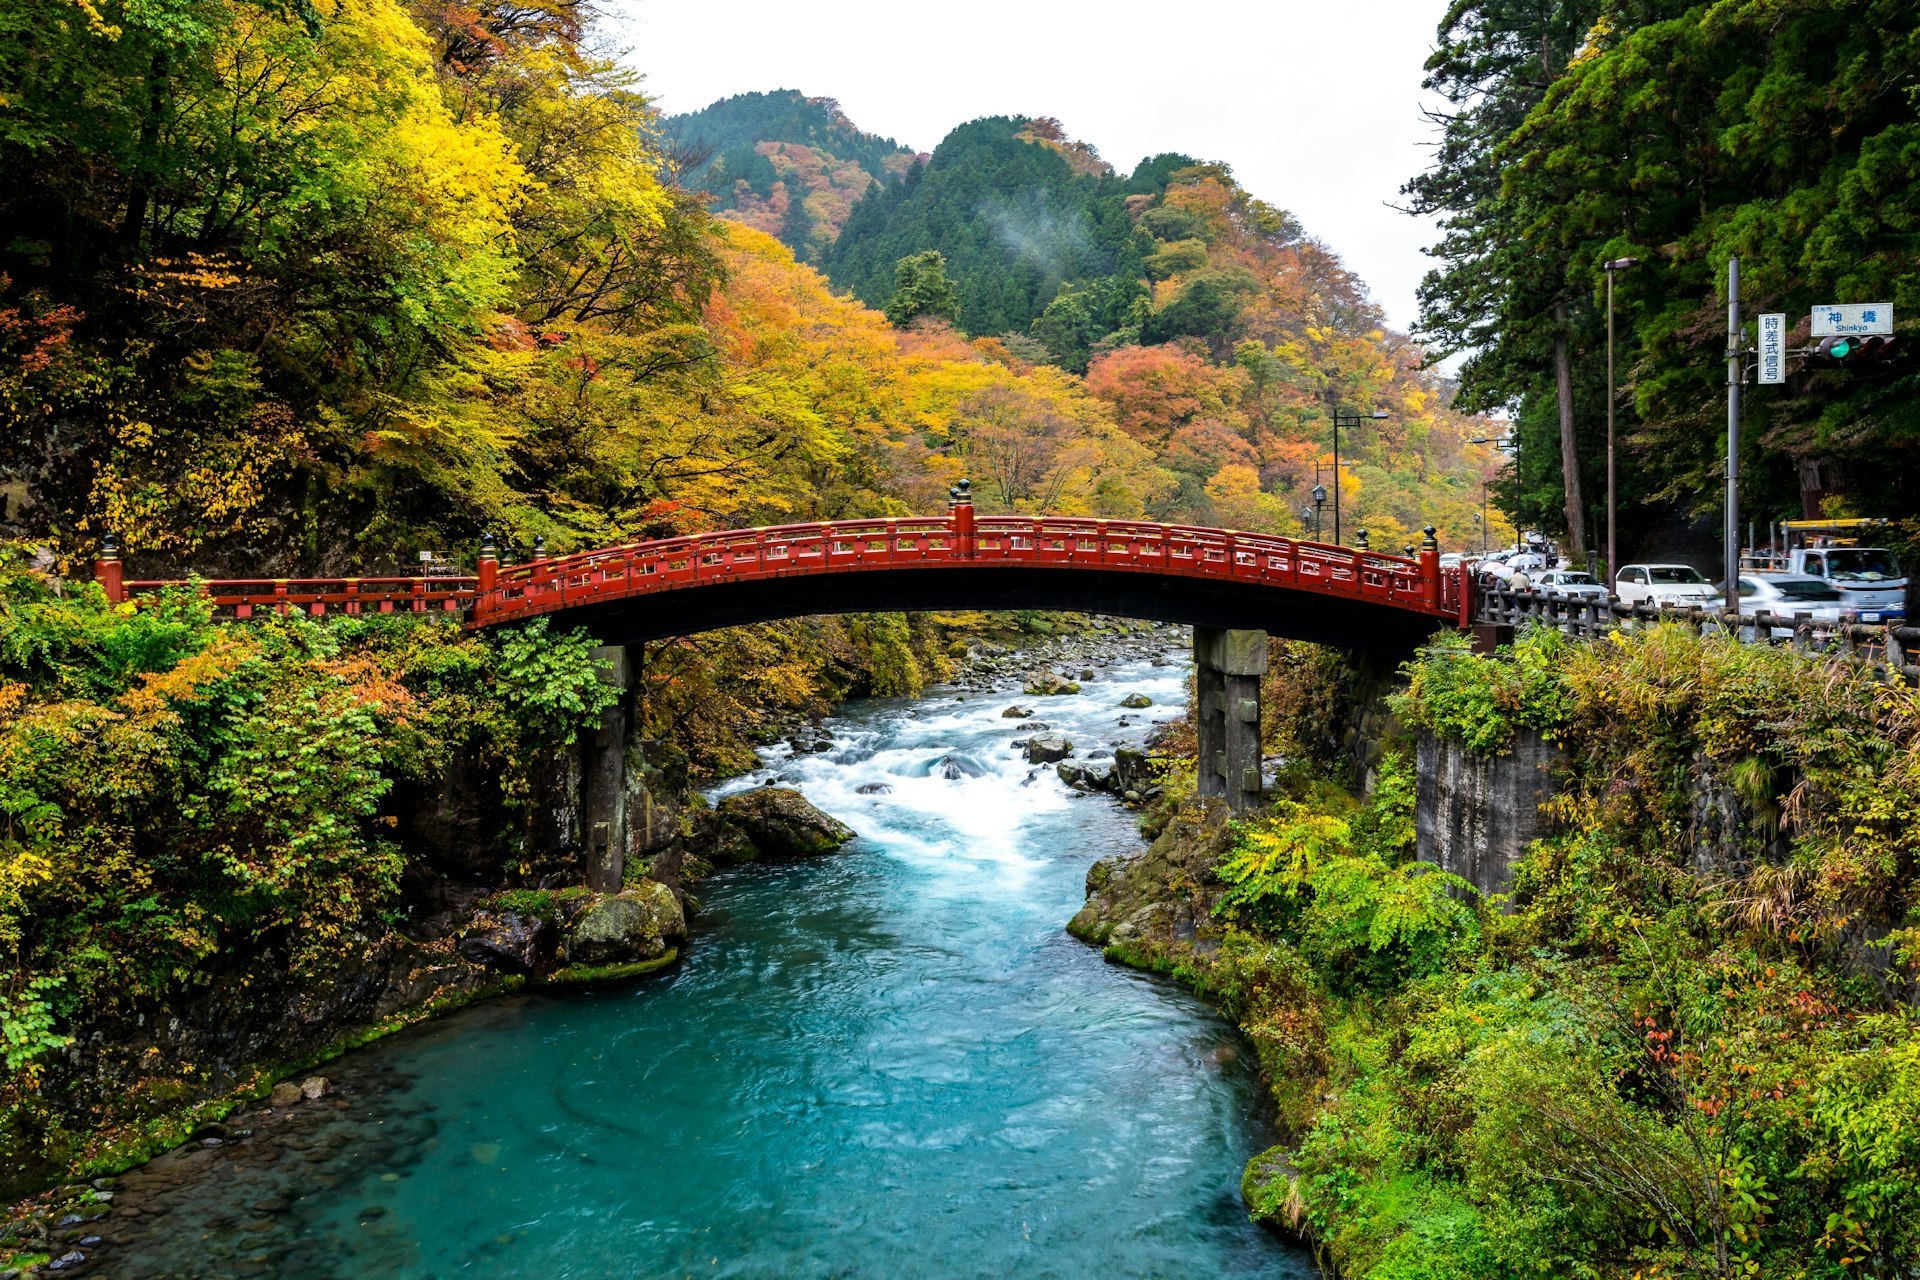 A red bridge spans a river and is surrounded by autumnal foliage in Nikko, Japan